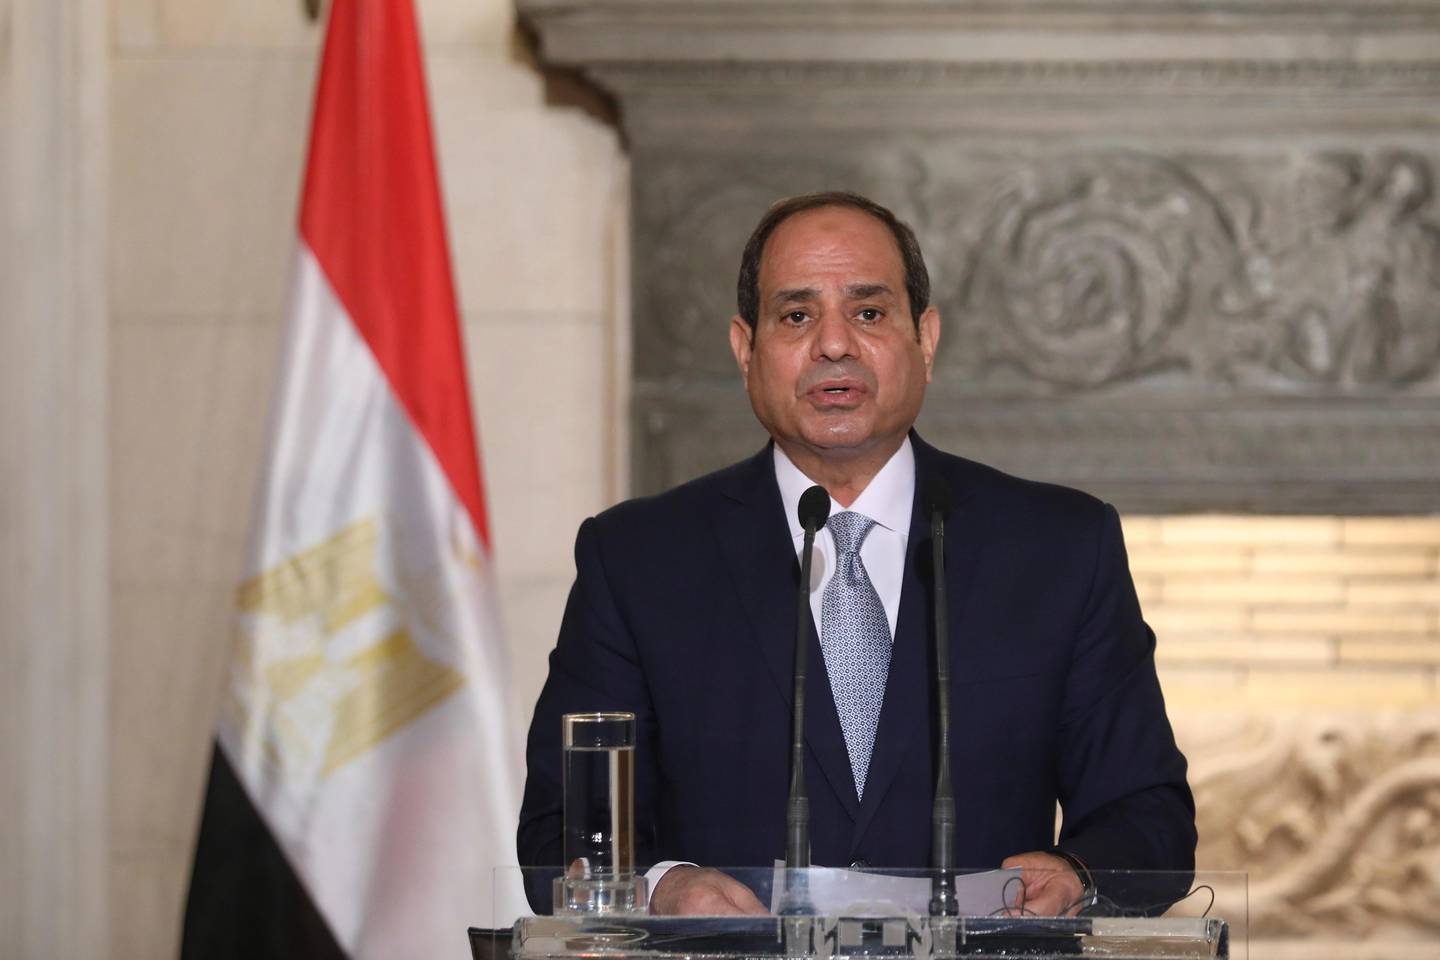 Egyptian President Abdel Fattah al-Sisi makes statements during a joint news conference with the Greek Prime Minister Kyriakos Mitsotakis at Maximos Mansion in Athens, Wednesday, Nov. 11, 2020. Egypt's president is meeting with Greek officials in Athens on his first visit to the southern European nation since the two countries signed a deal demarcating maritime boundaries between them in the eastern Mediterranean. (Costas Baltas/Pool via AP)